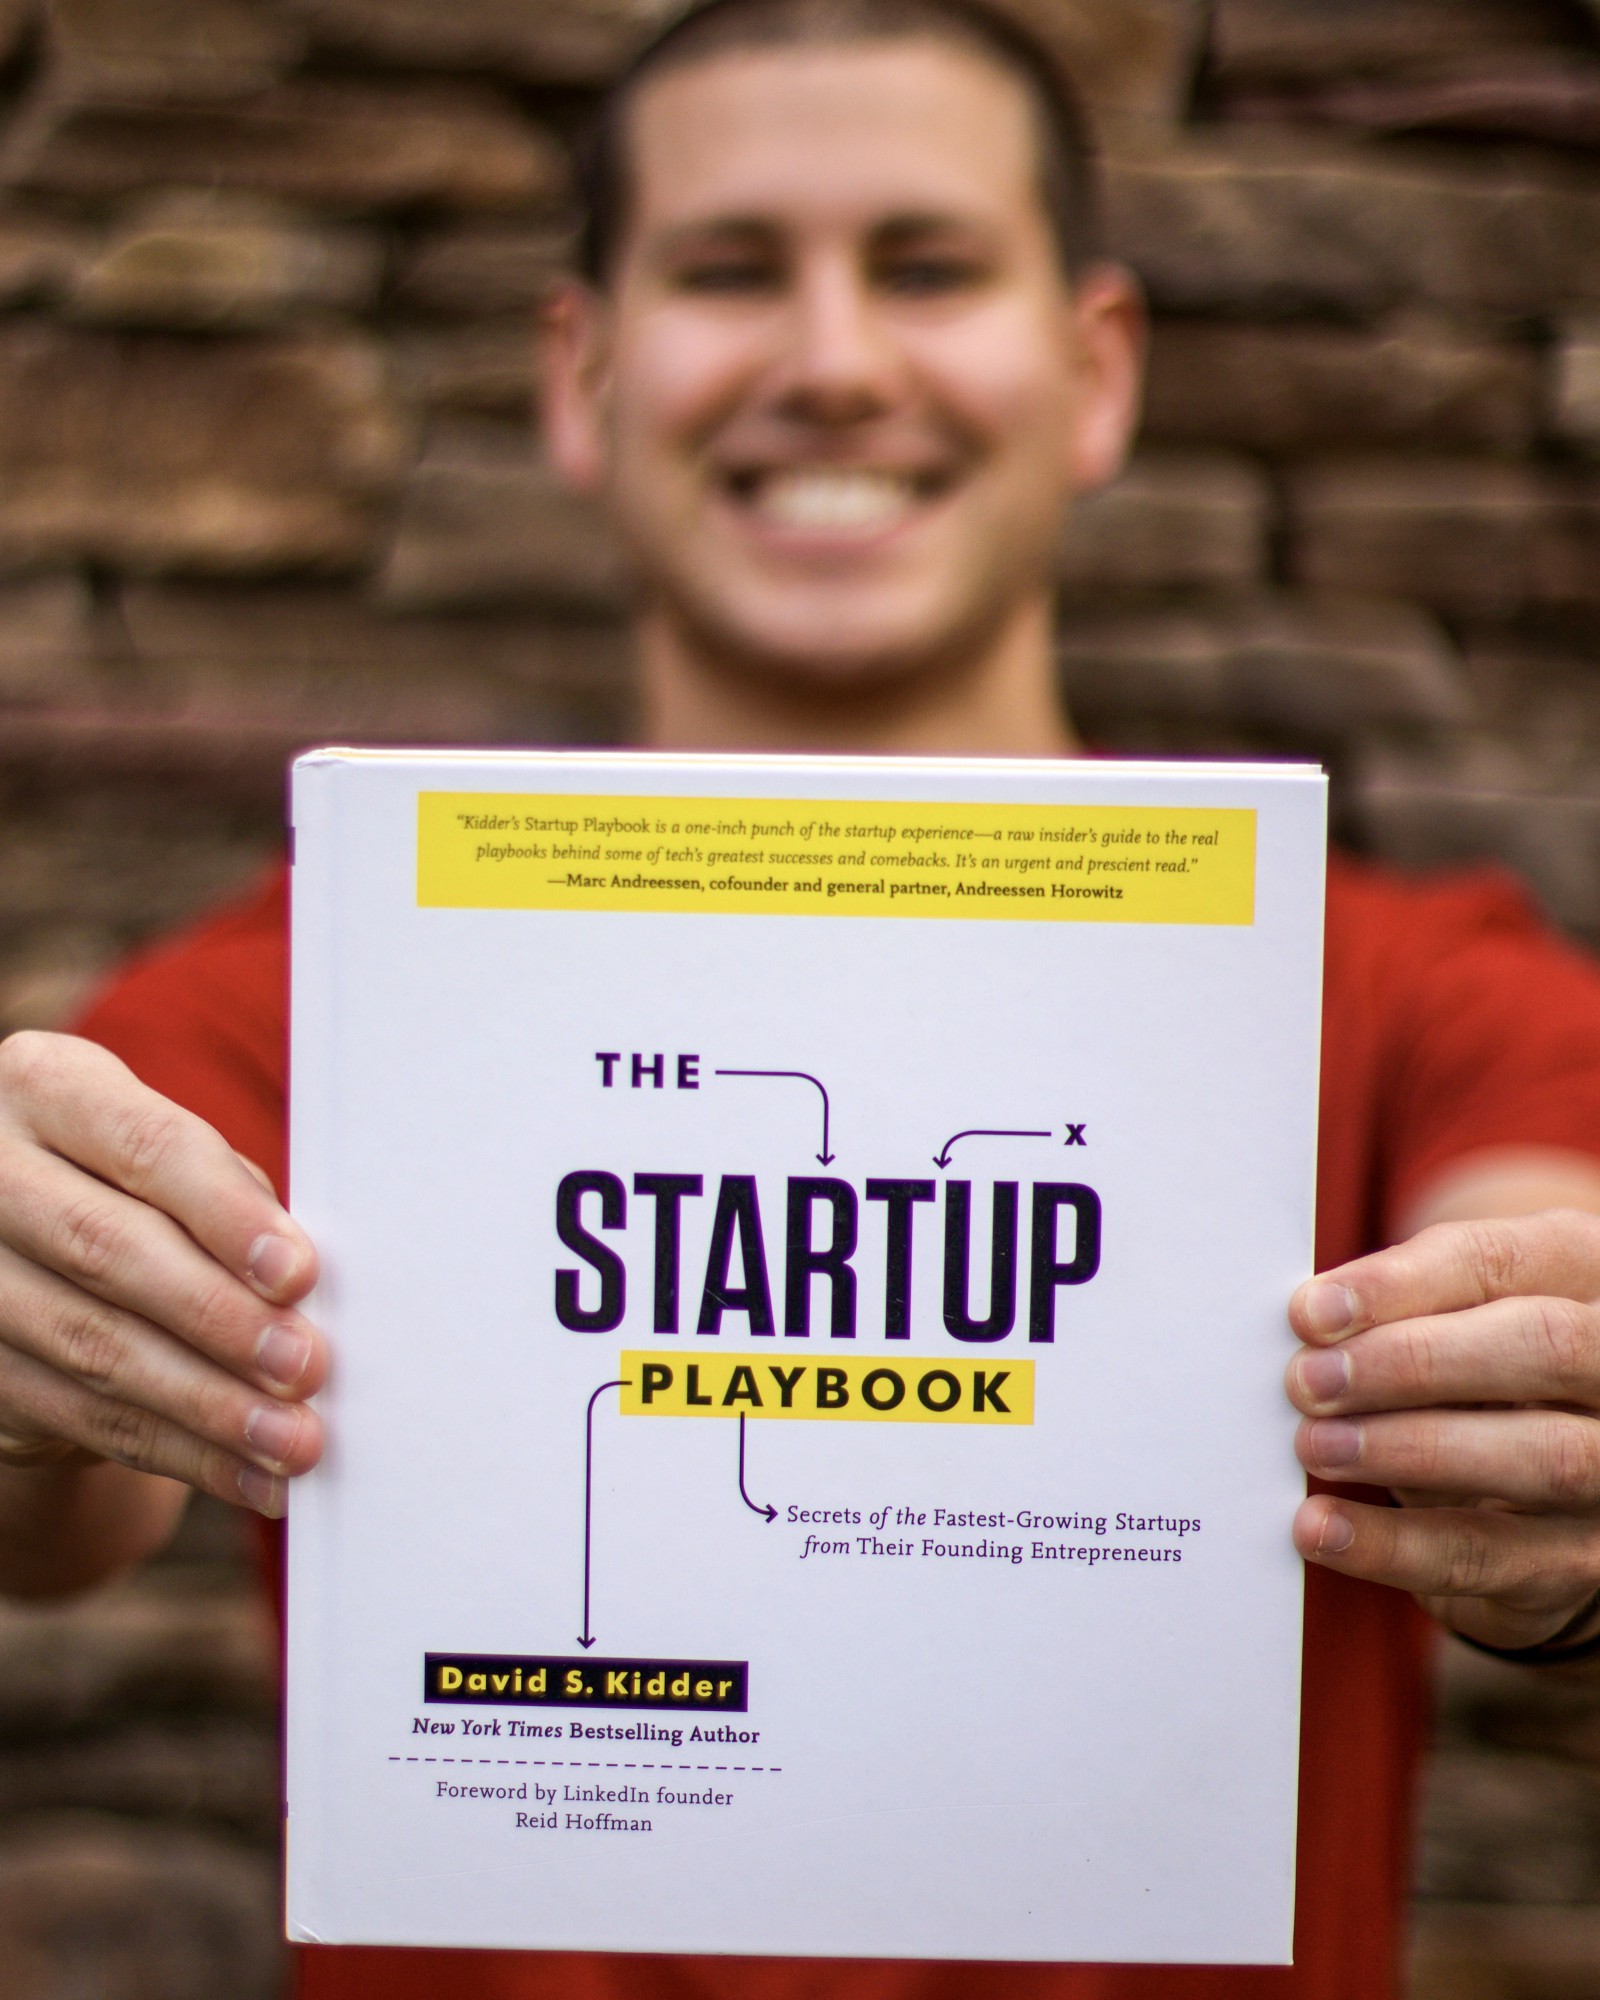 The Startup Playbook: Secrets of the Fastest-Growing Startups From Their Founding Entrepreneurs